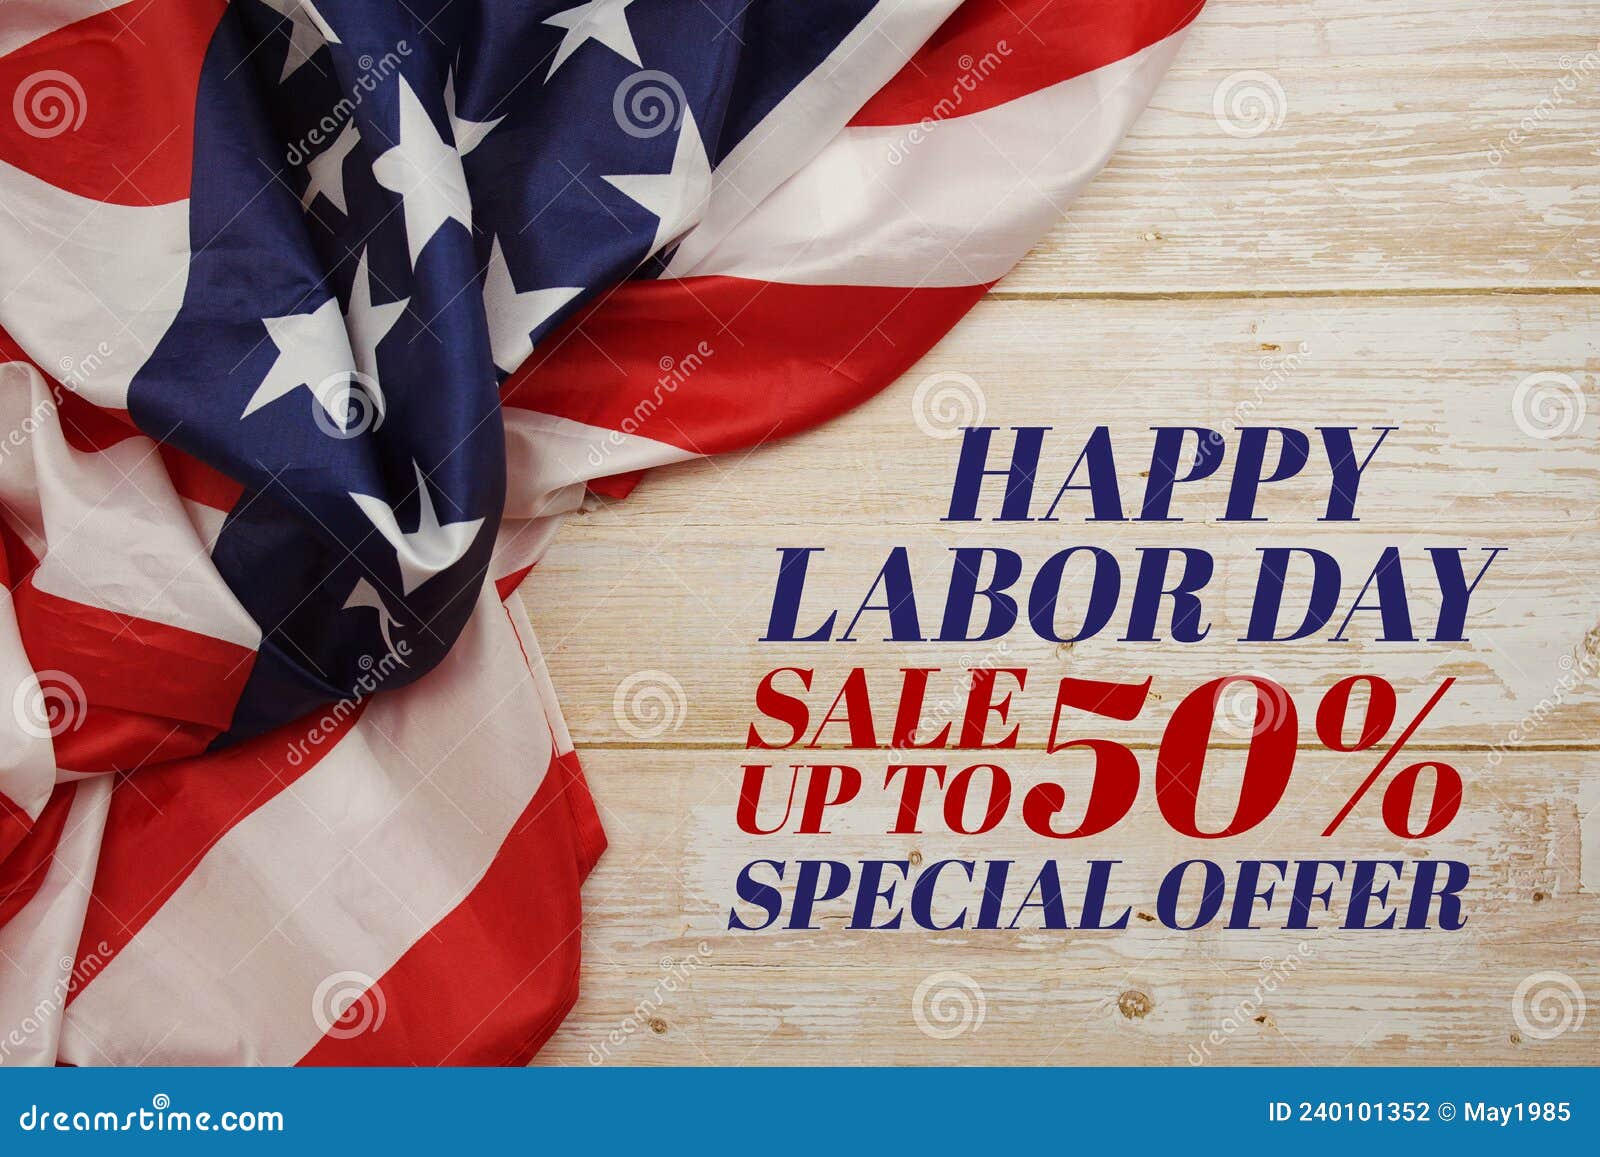 Happy Labor Day SALE!!! 🇺🇸 🎉 🇺🇸 🎉 Enjoy a discount while you print  your photographs!⁠ ⁠ We're offering 15% OFF Prints⁠ ⁠ Use LABORDAY21…